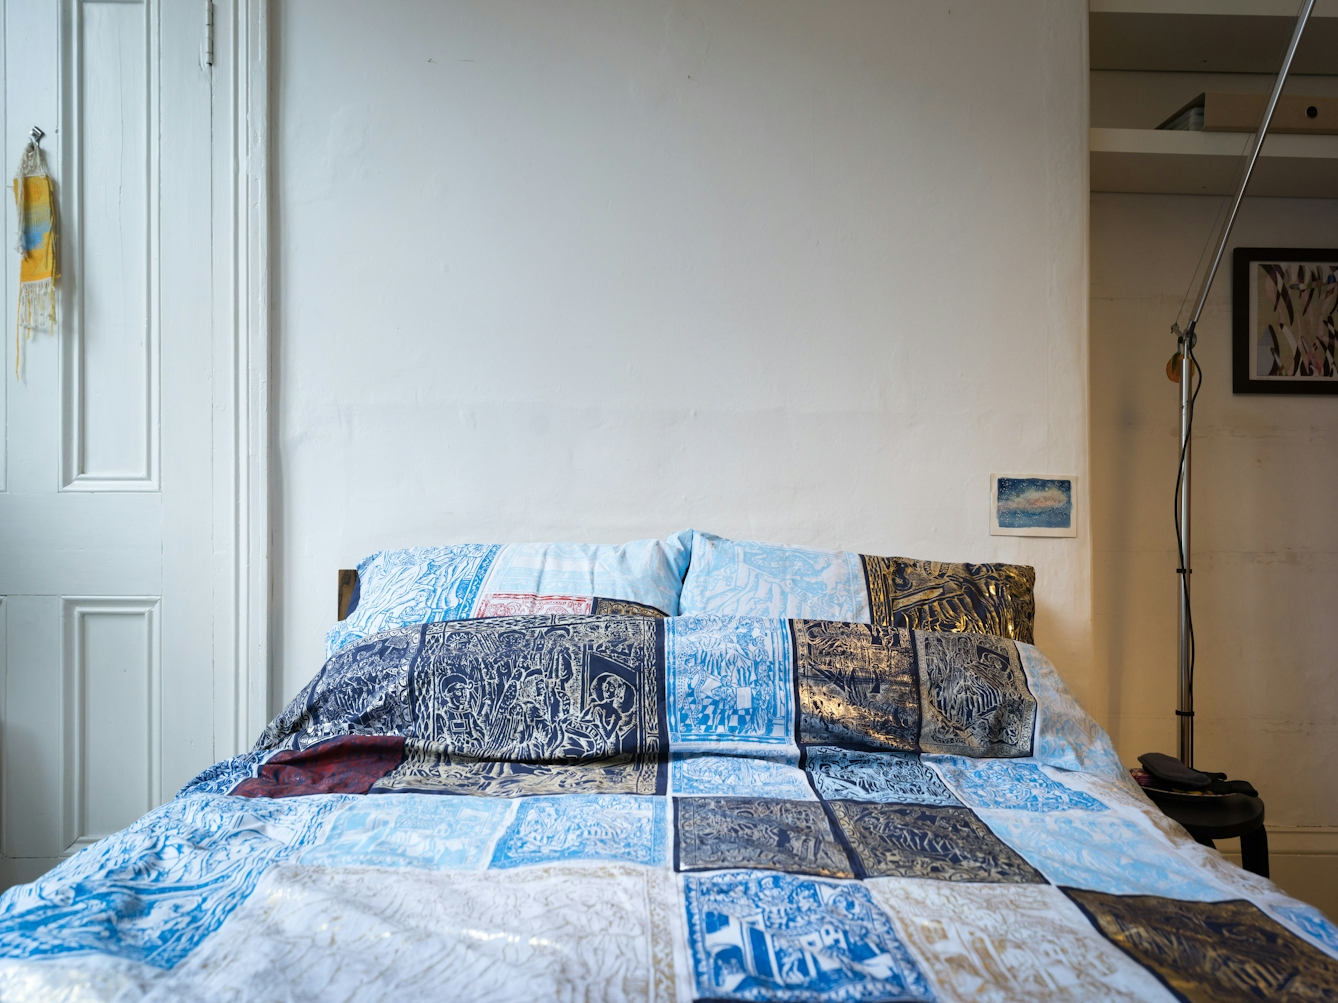 Photograph of a bedroom showing a double bed made up with a duvet cover and pillowcases which are made of a patchwork of blue, red, silver and gold screen-printed designs. To the left of the bed is part of a door. To the right is part of a lamp stand, some shelves and a framed print on the wall.